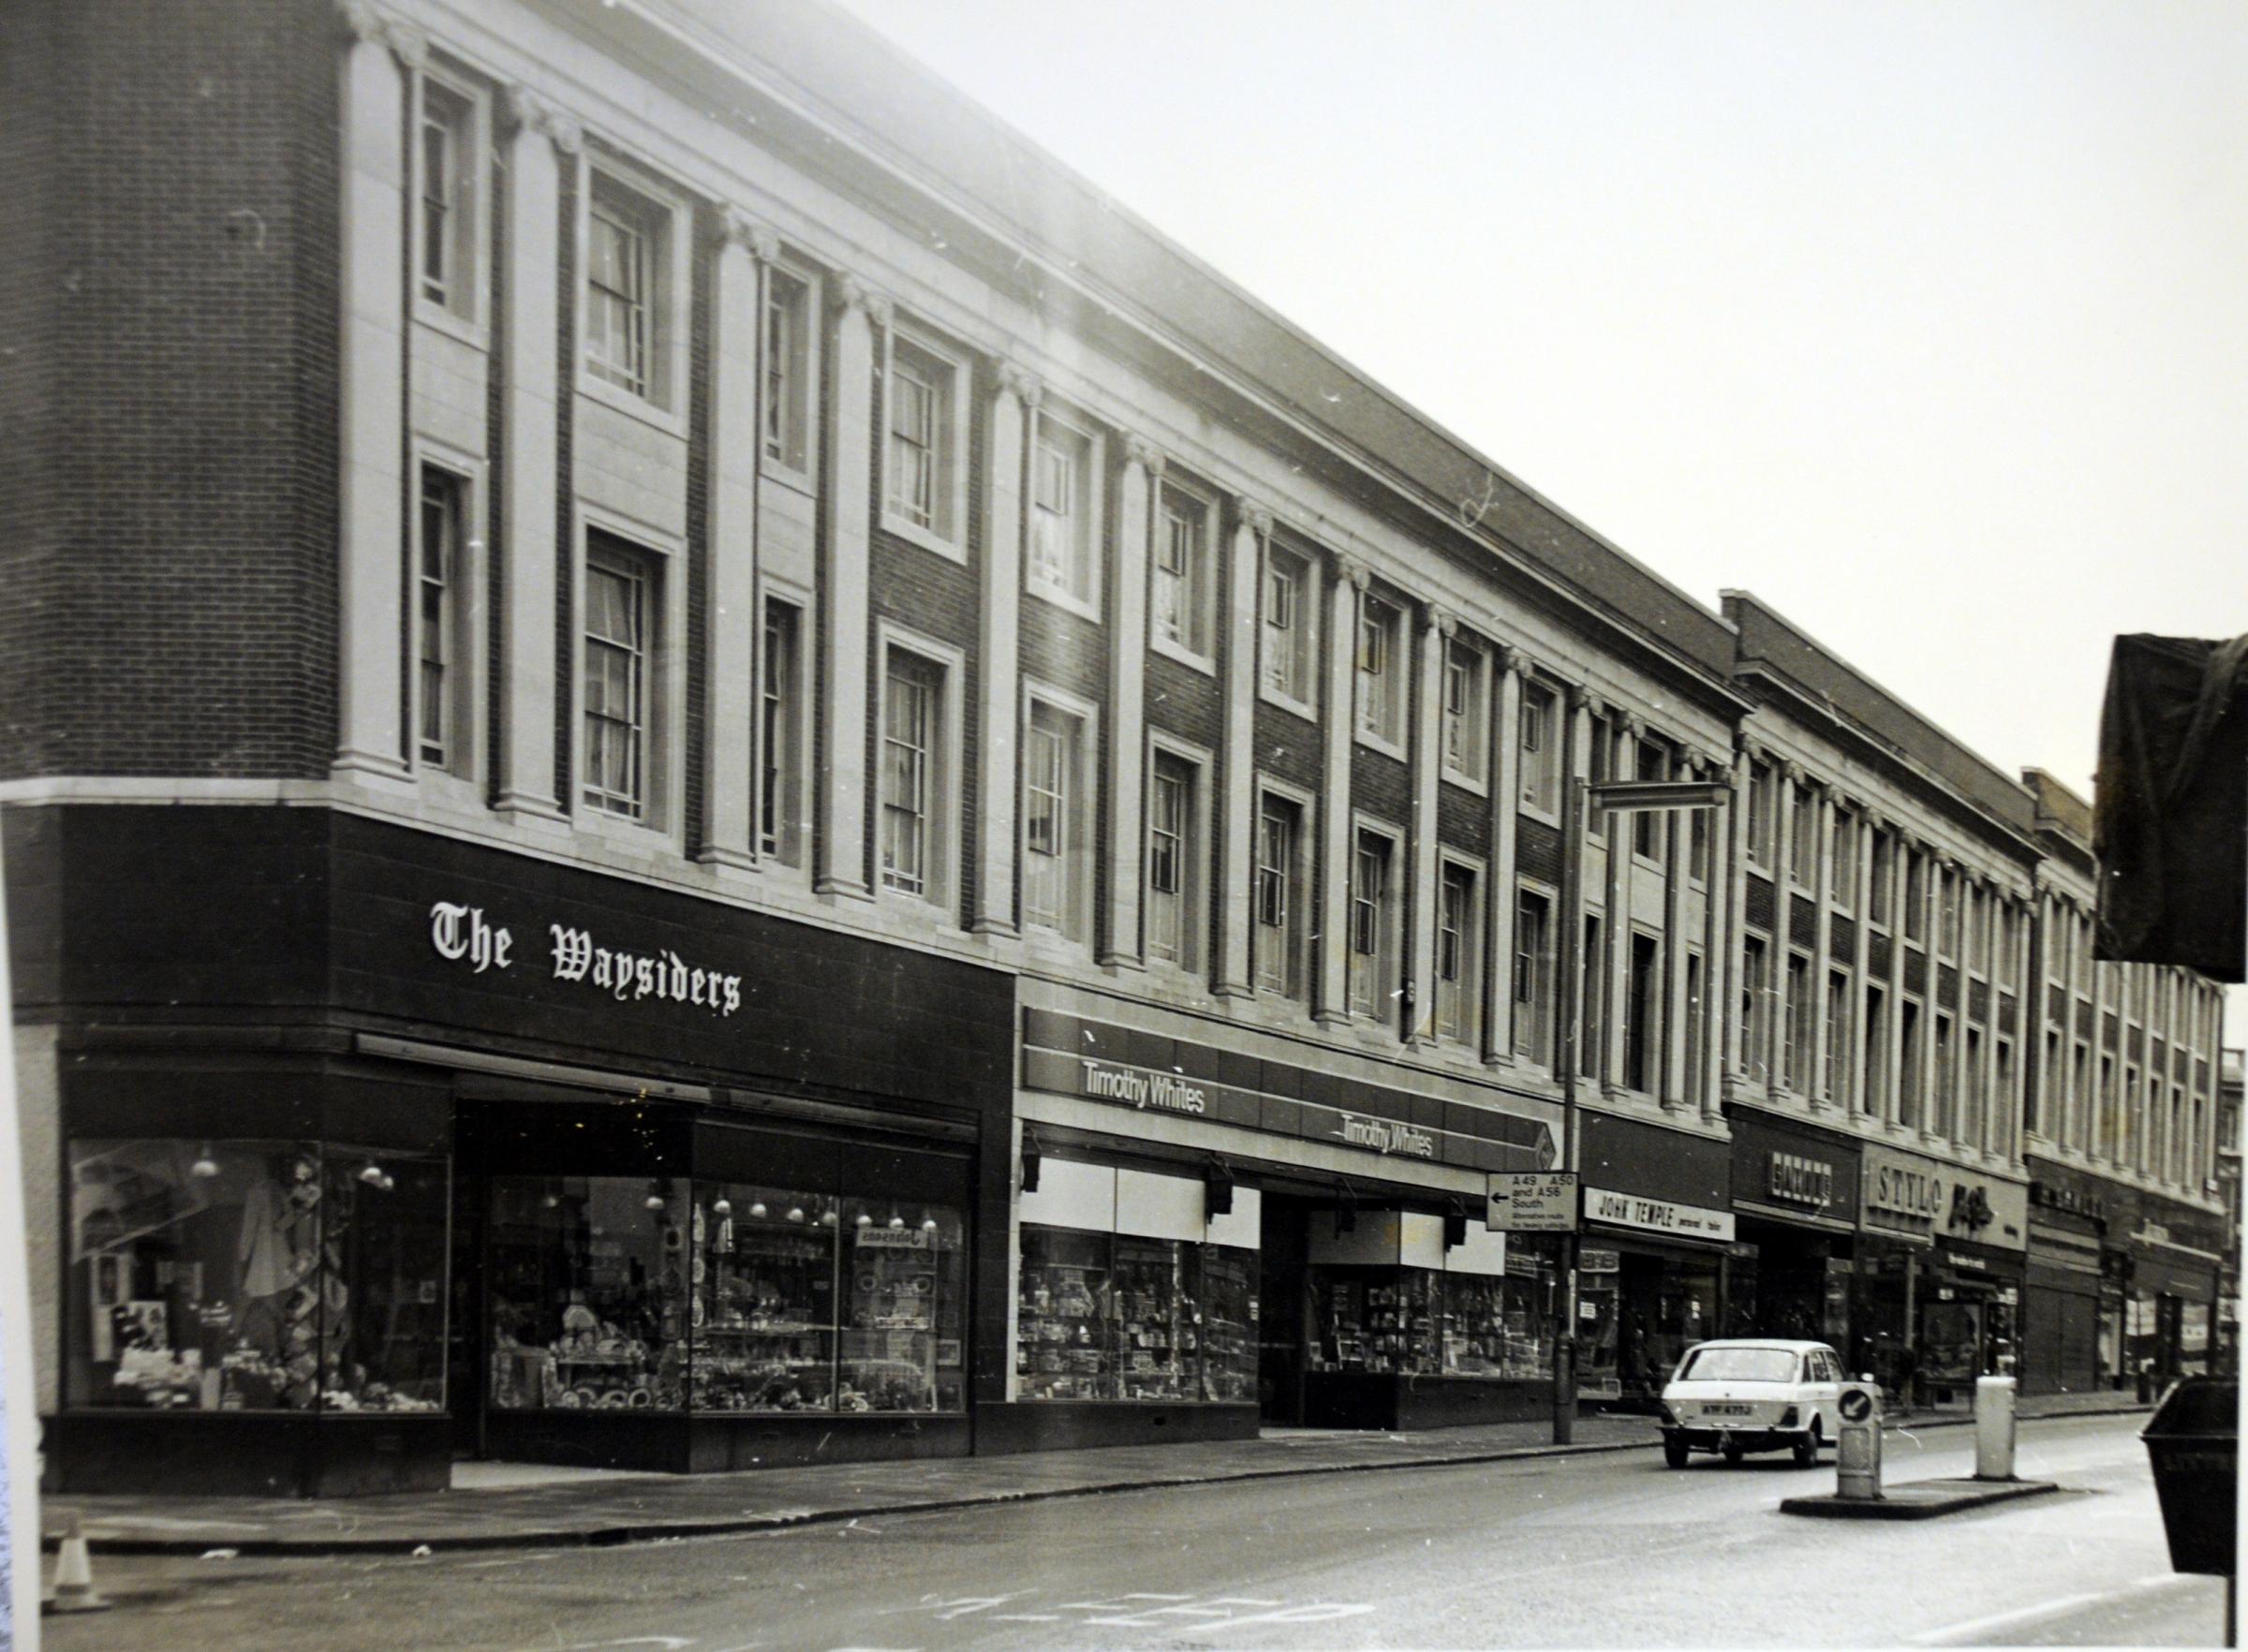 From Gay Miss to Waysiders, Warrington's forgotten shops